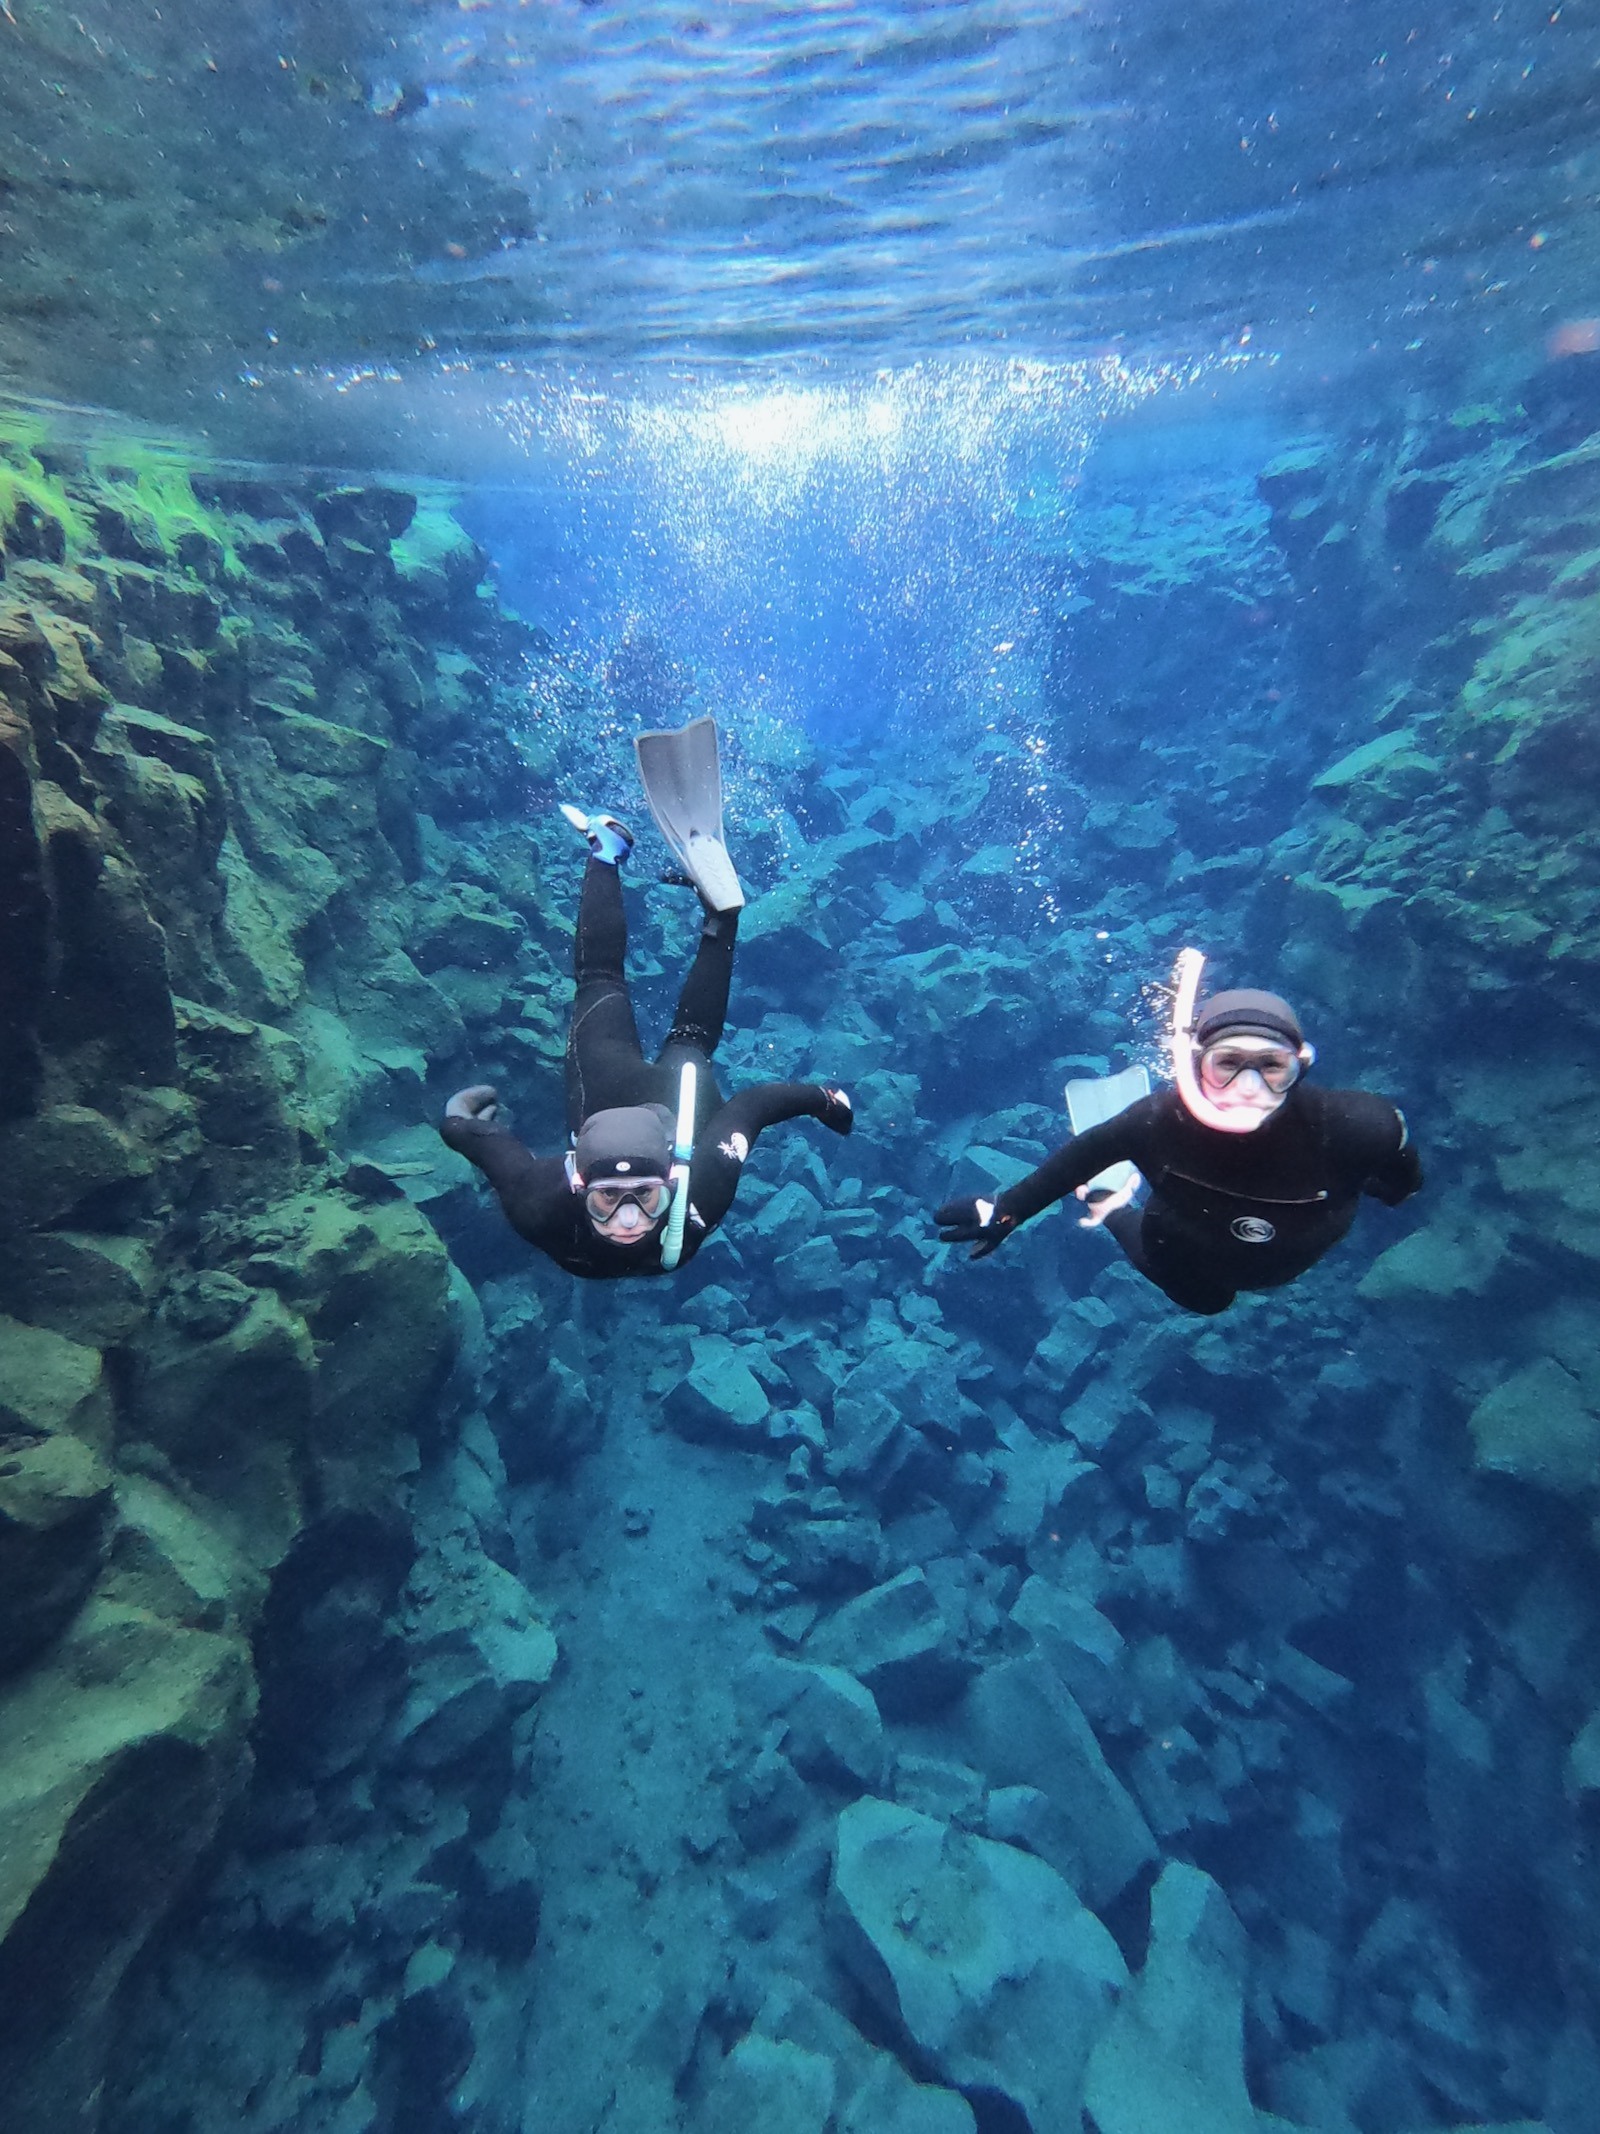 Snorkeling in the Silfra Fissure.